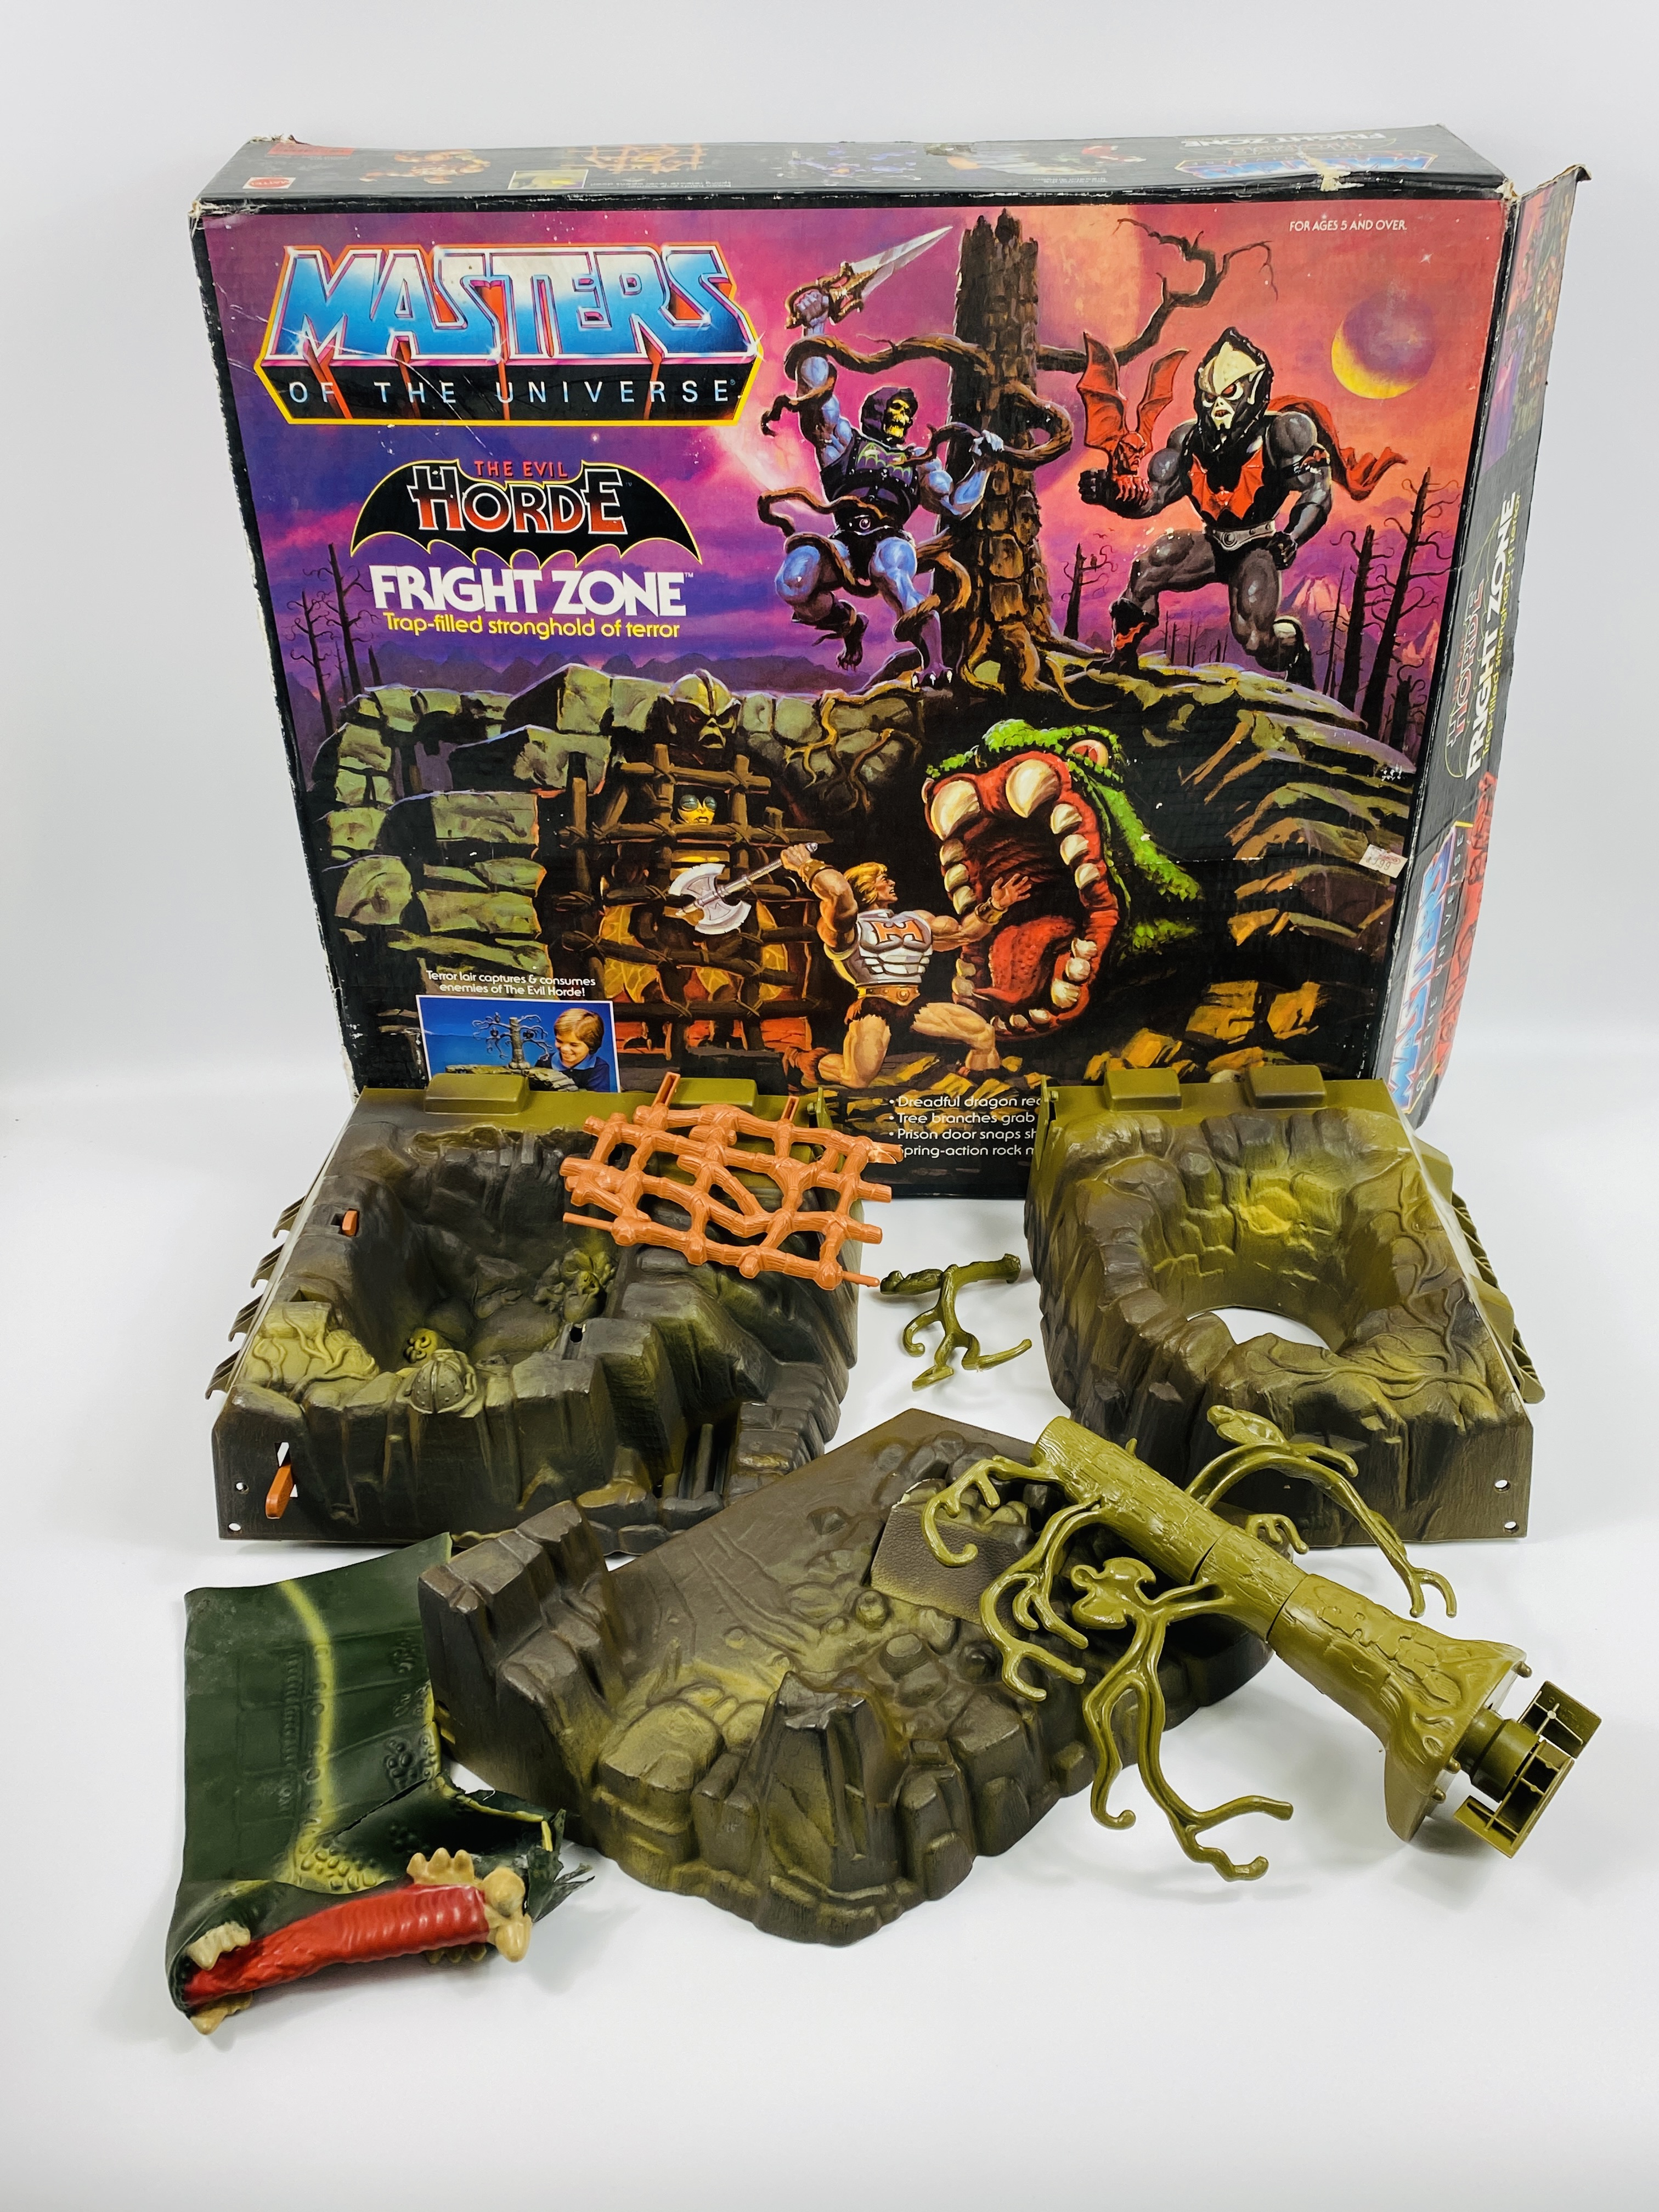 Boxed Mattel Masters of The Universe, The Evil Horde Fright Zone. - Image 2 of 4